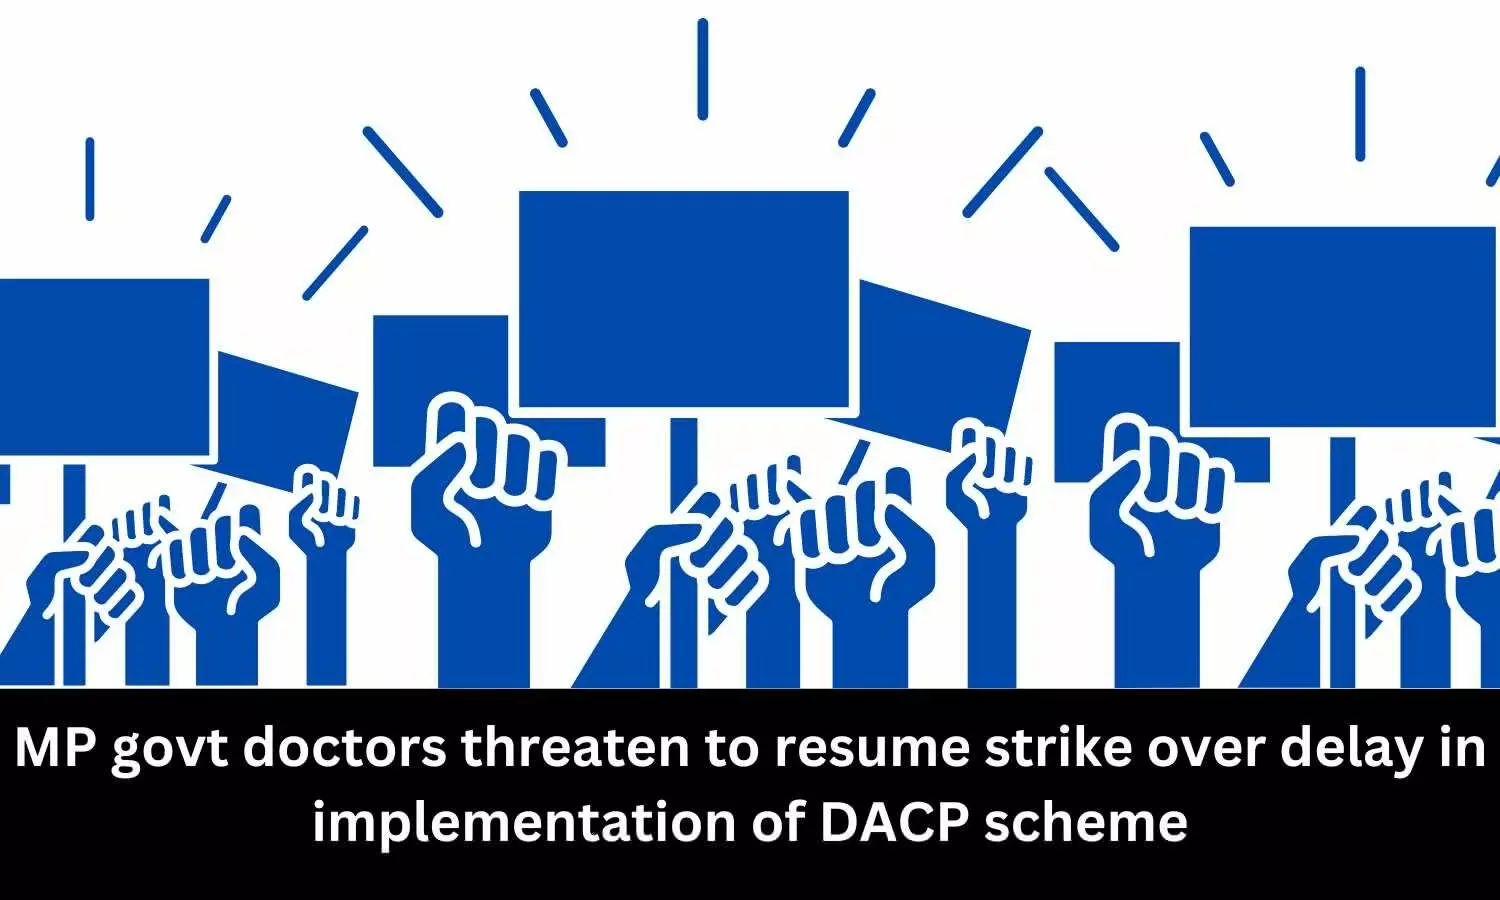 Govt doctors in MP threaten to resume strike over delay in implementation of DACP scheme